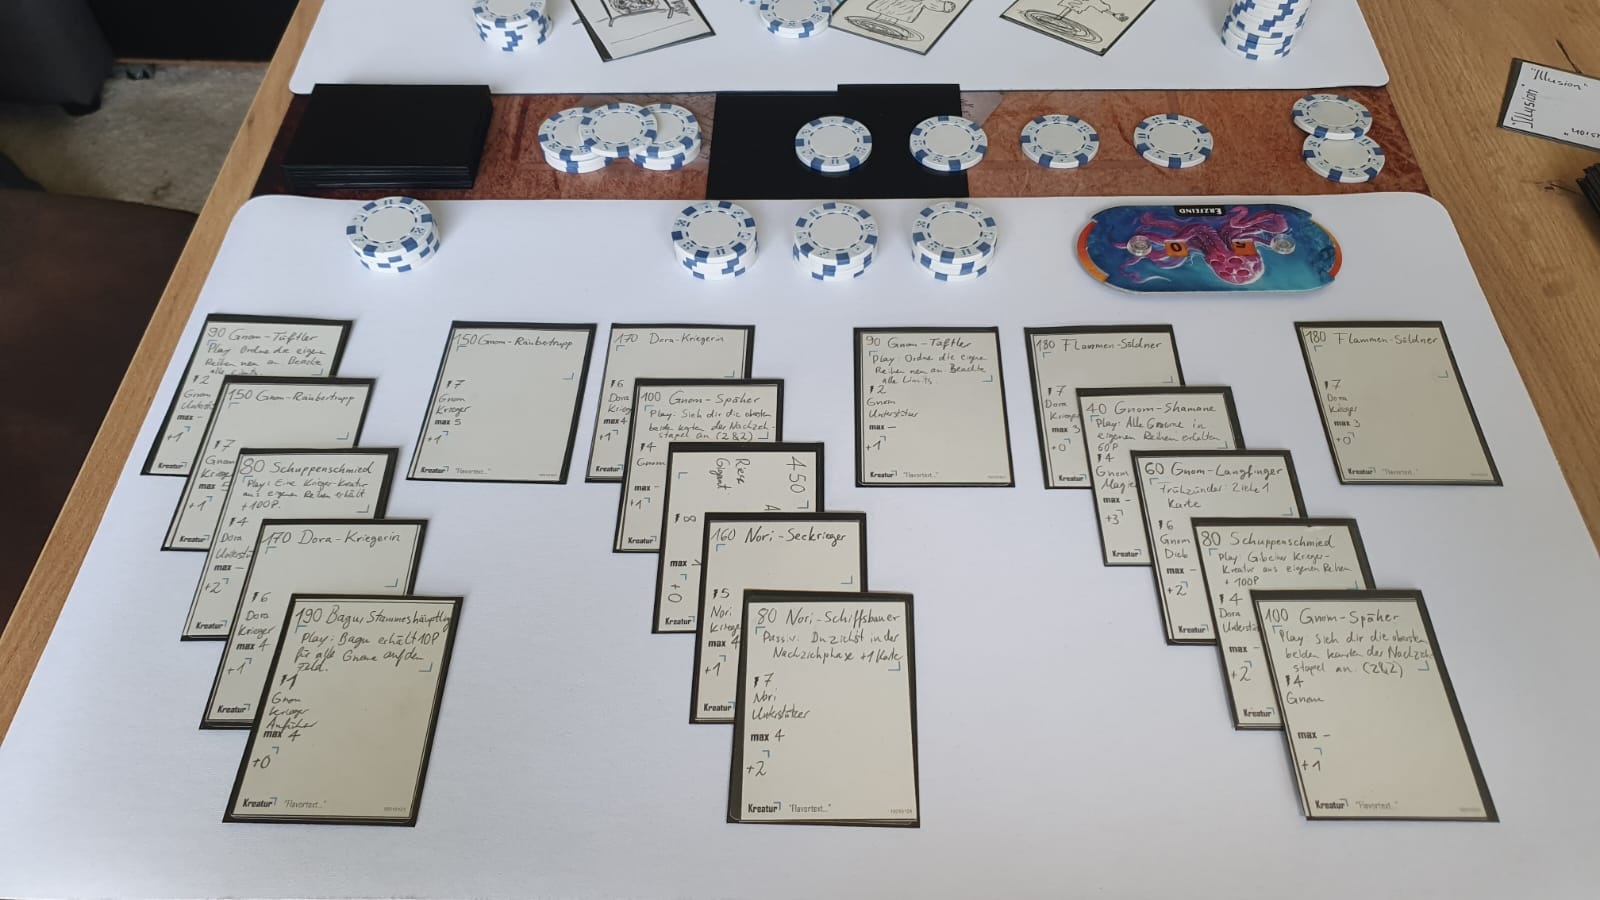 Spielsituation in Prototyp v0.7